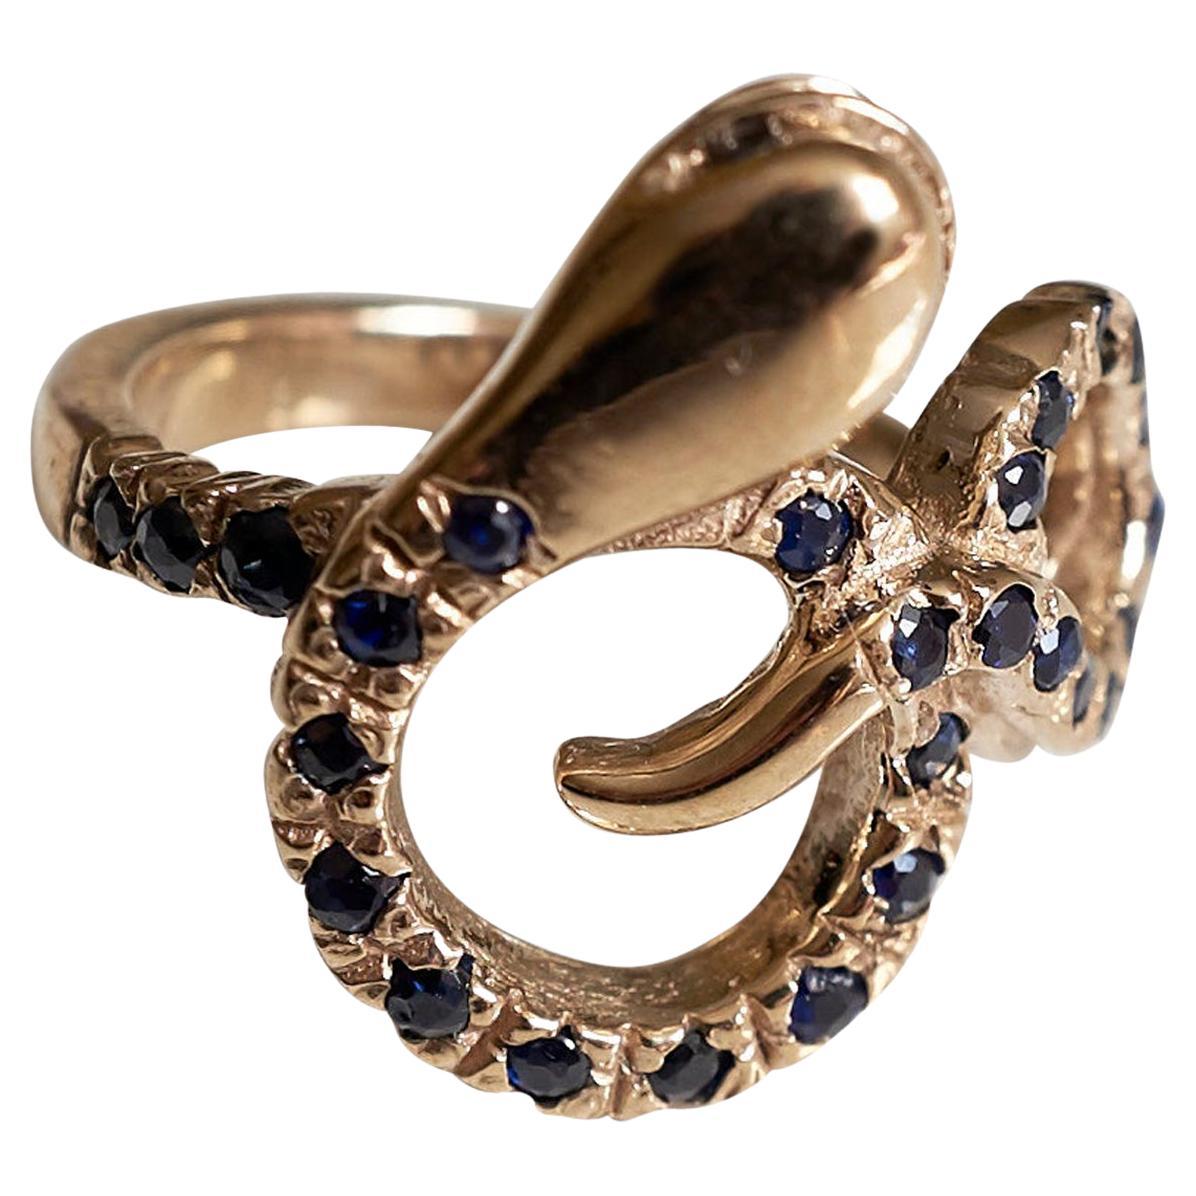 Black Diamond Aquamarine Snake Ring Gold Cocktail Victorian Style J Dauphin For Sale